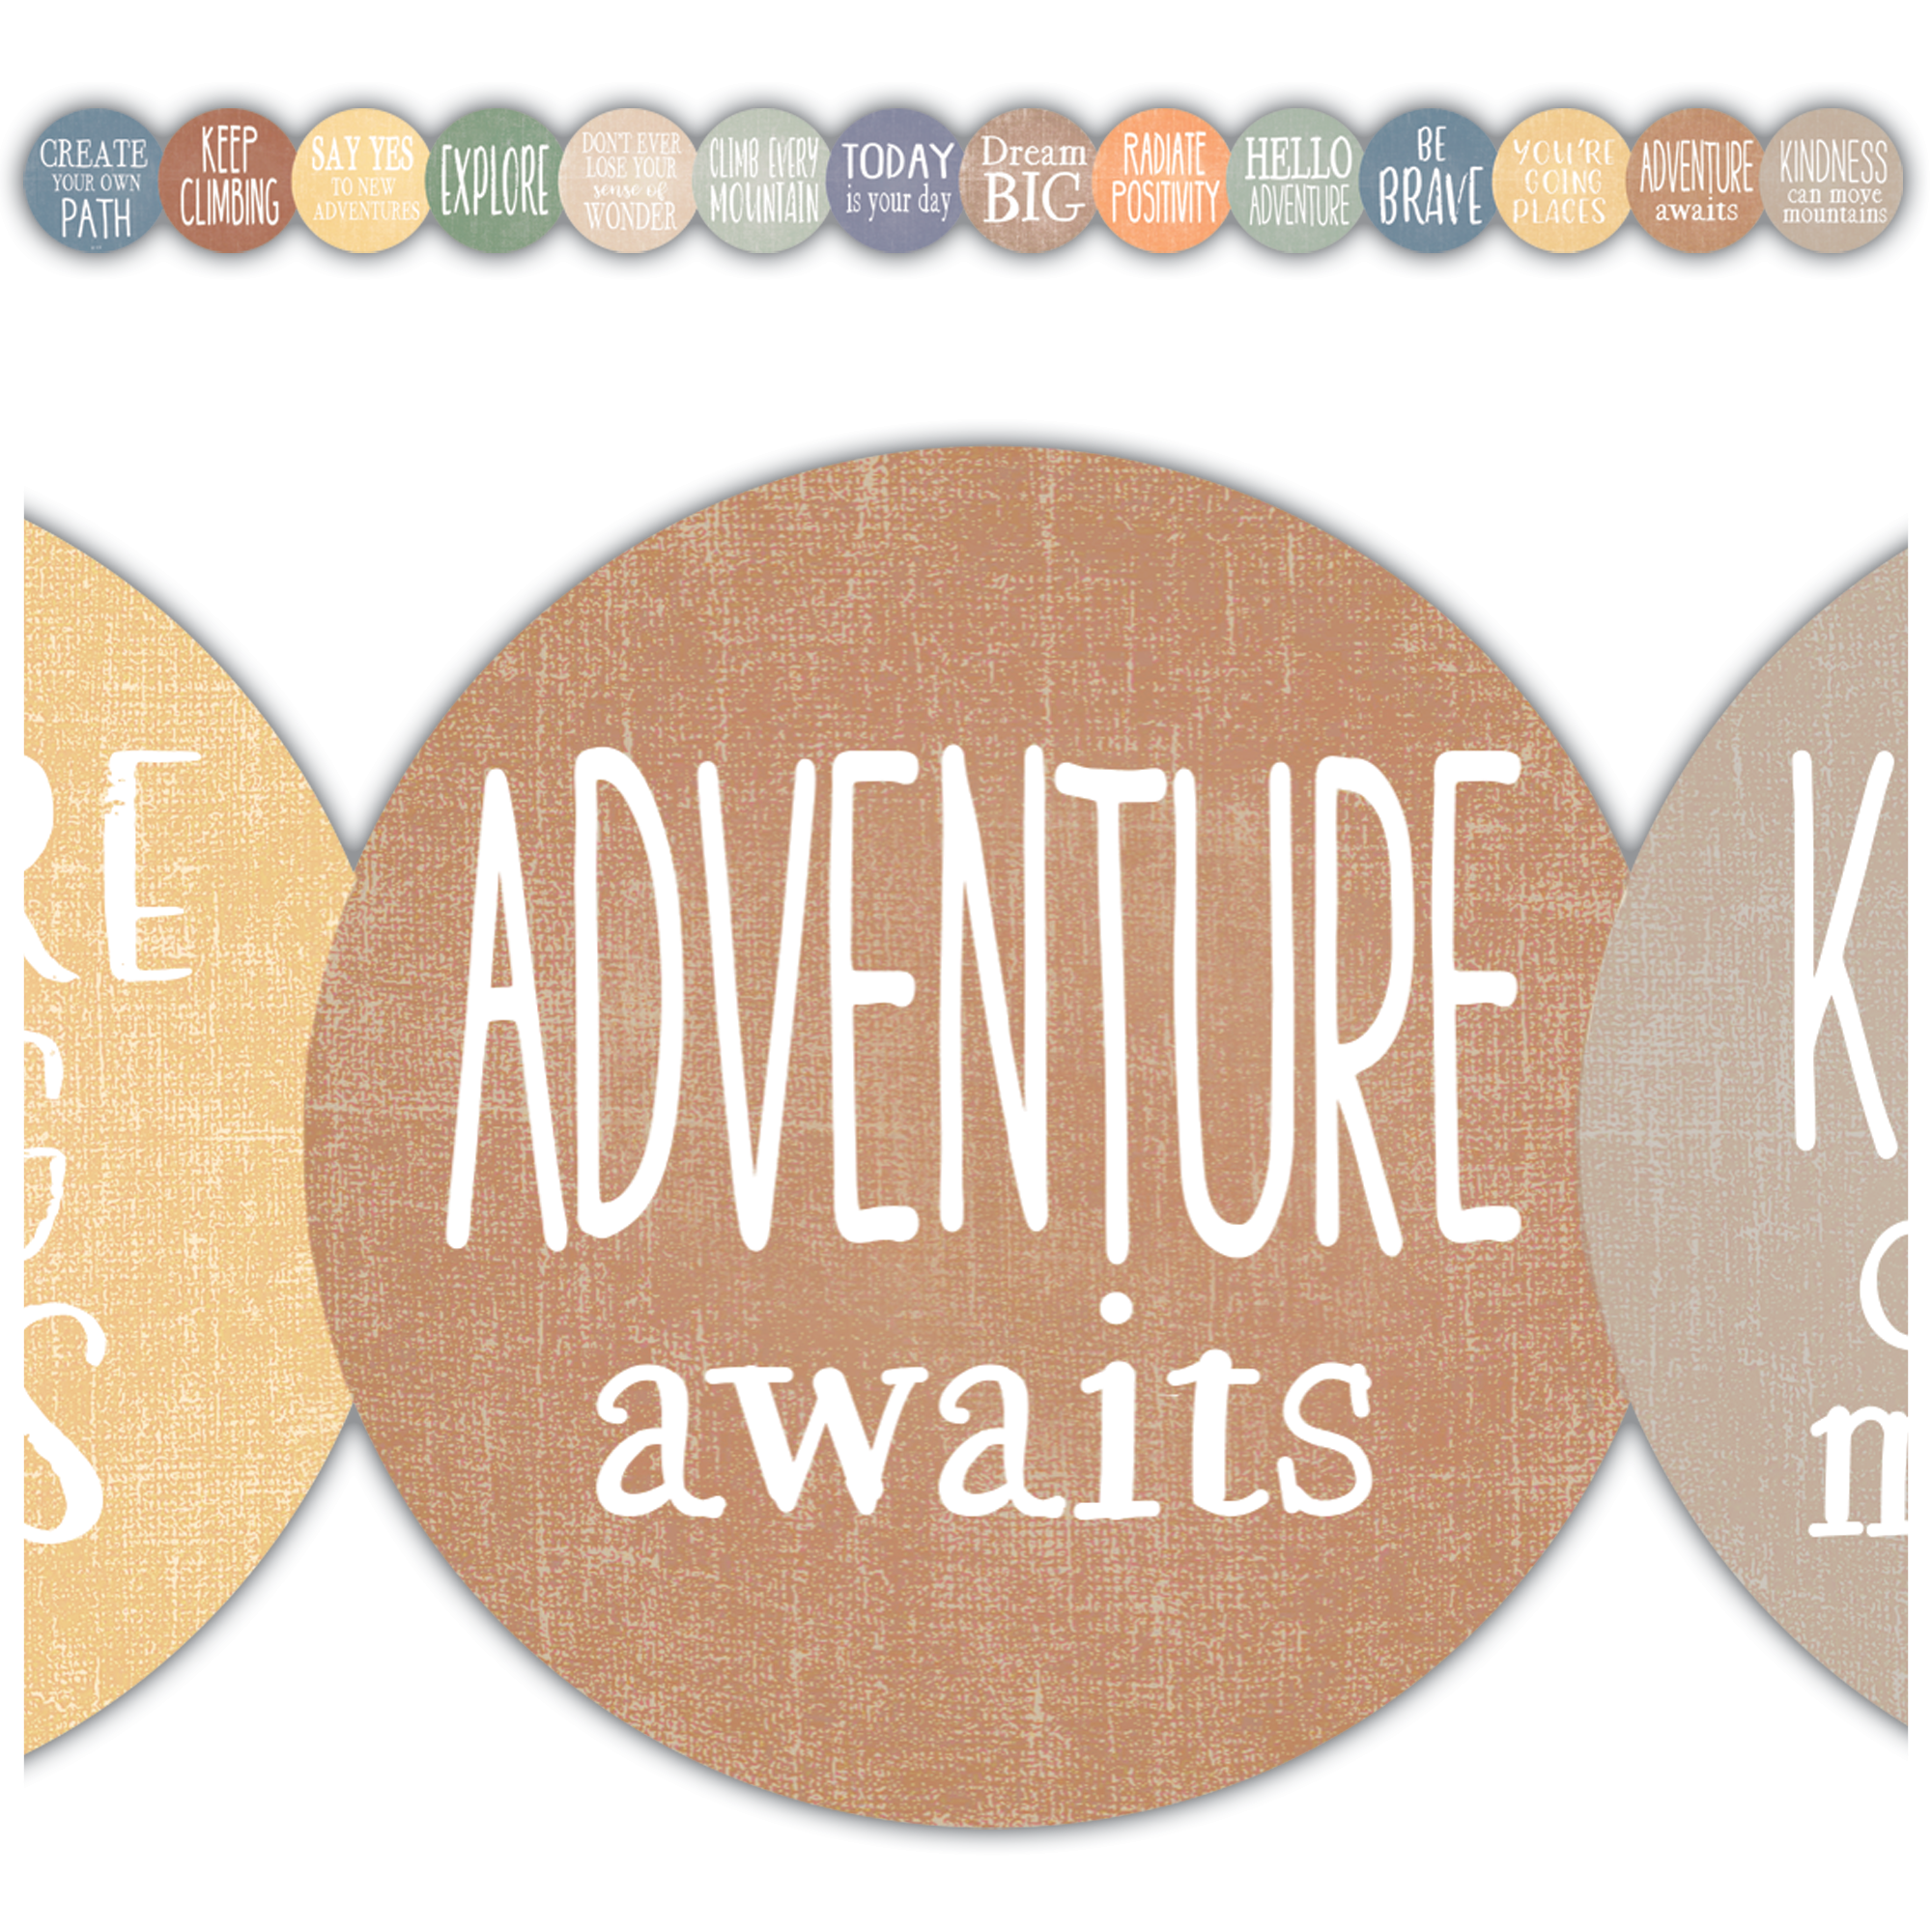 Moving Mountains Positive Sayings Die-Cut Border Trim